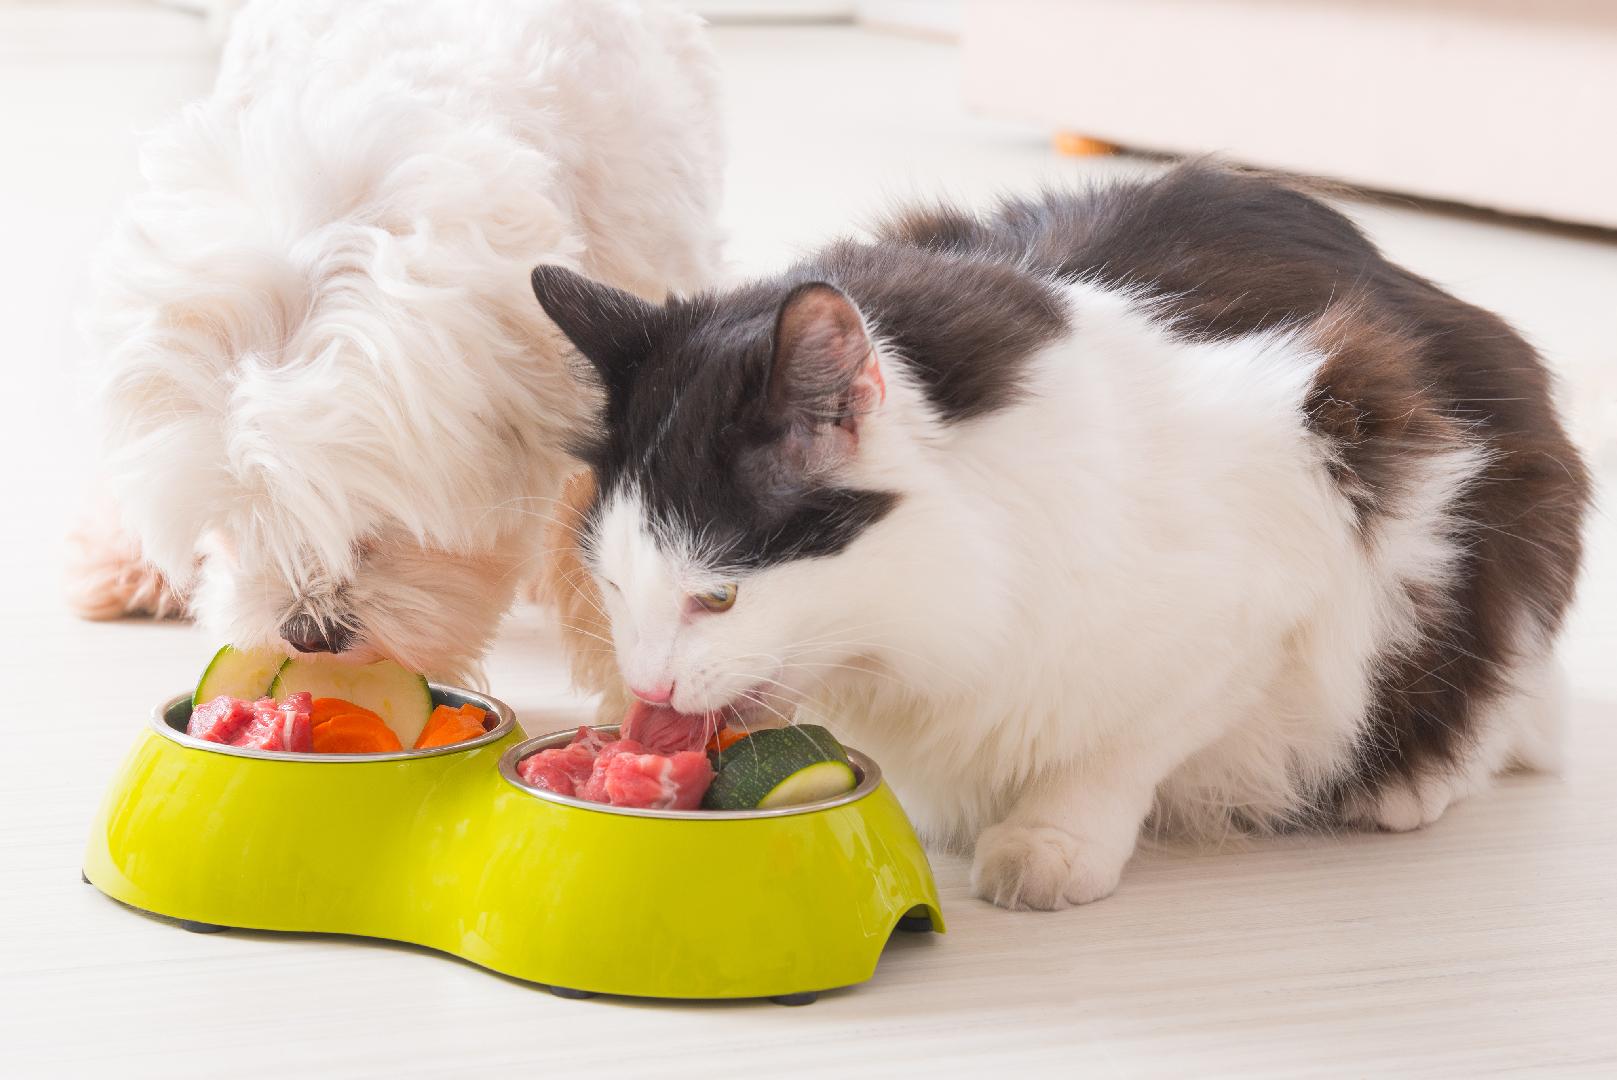 What are nutraceuticals, and what is their use in pet food?